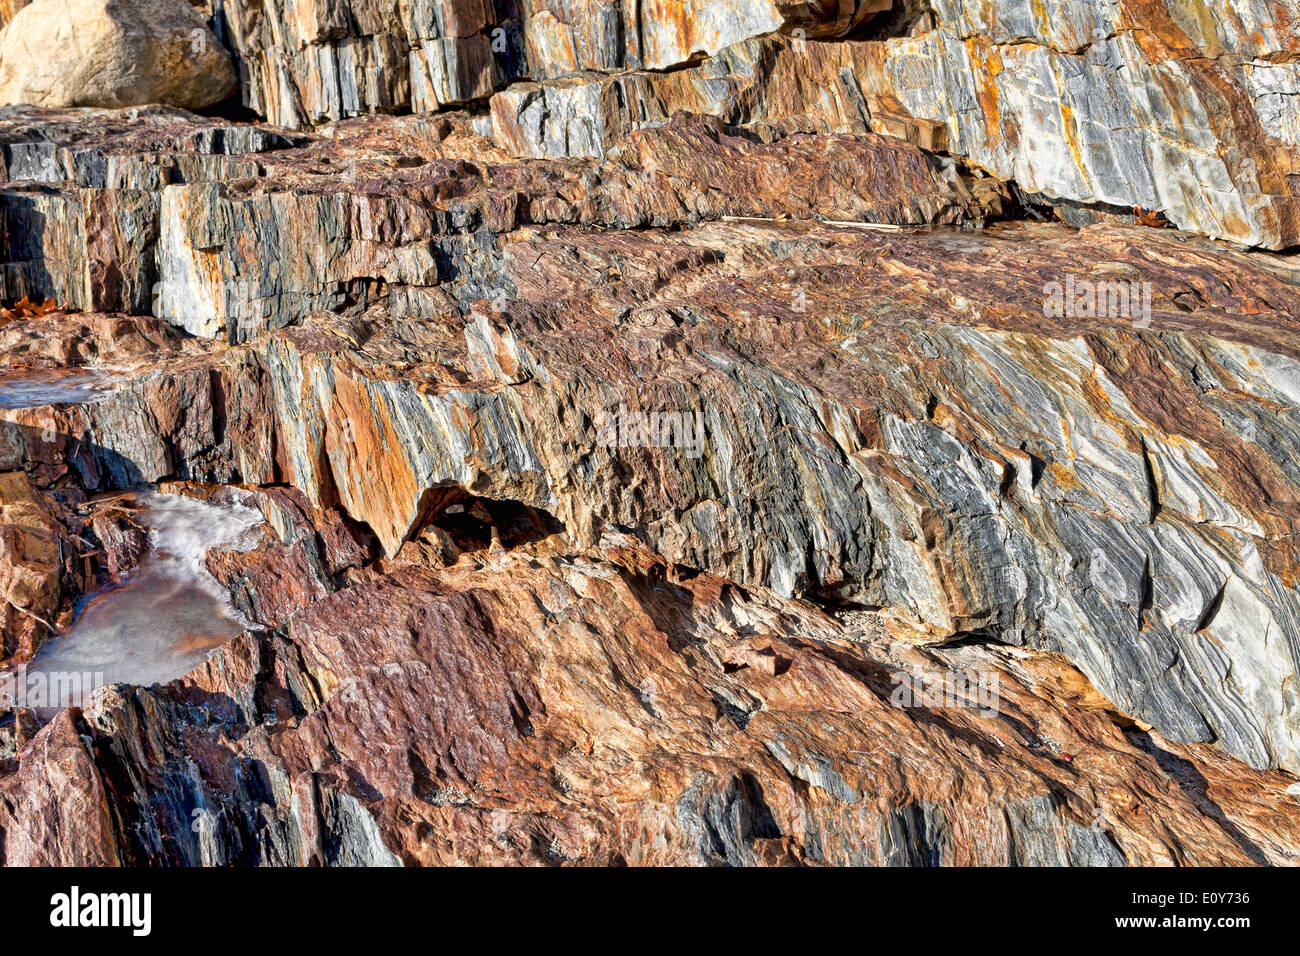 Tiered colorful rocks with pockets of frozen water. Stock Photo